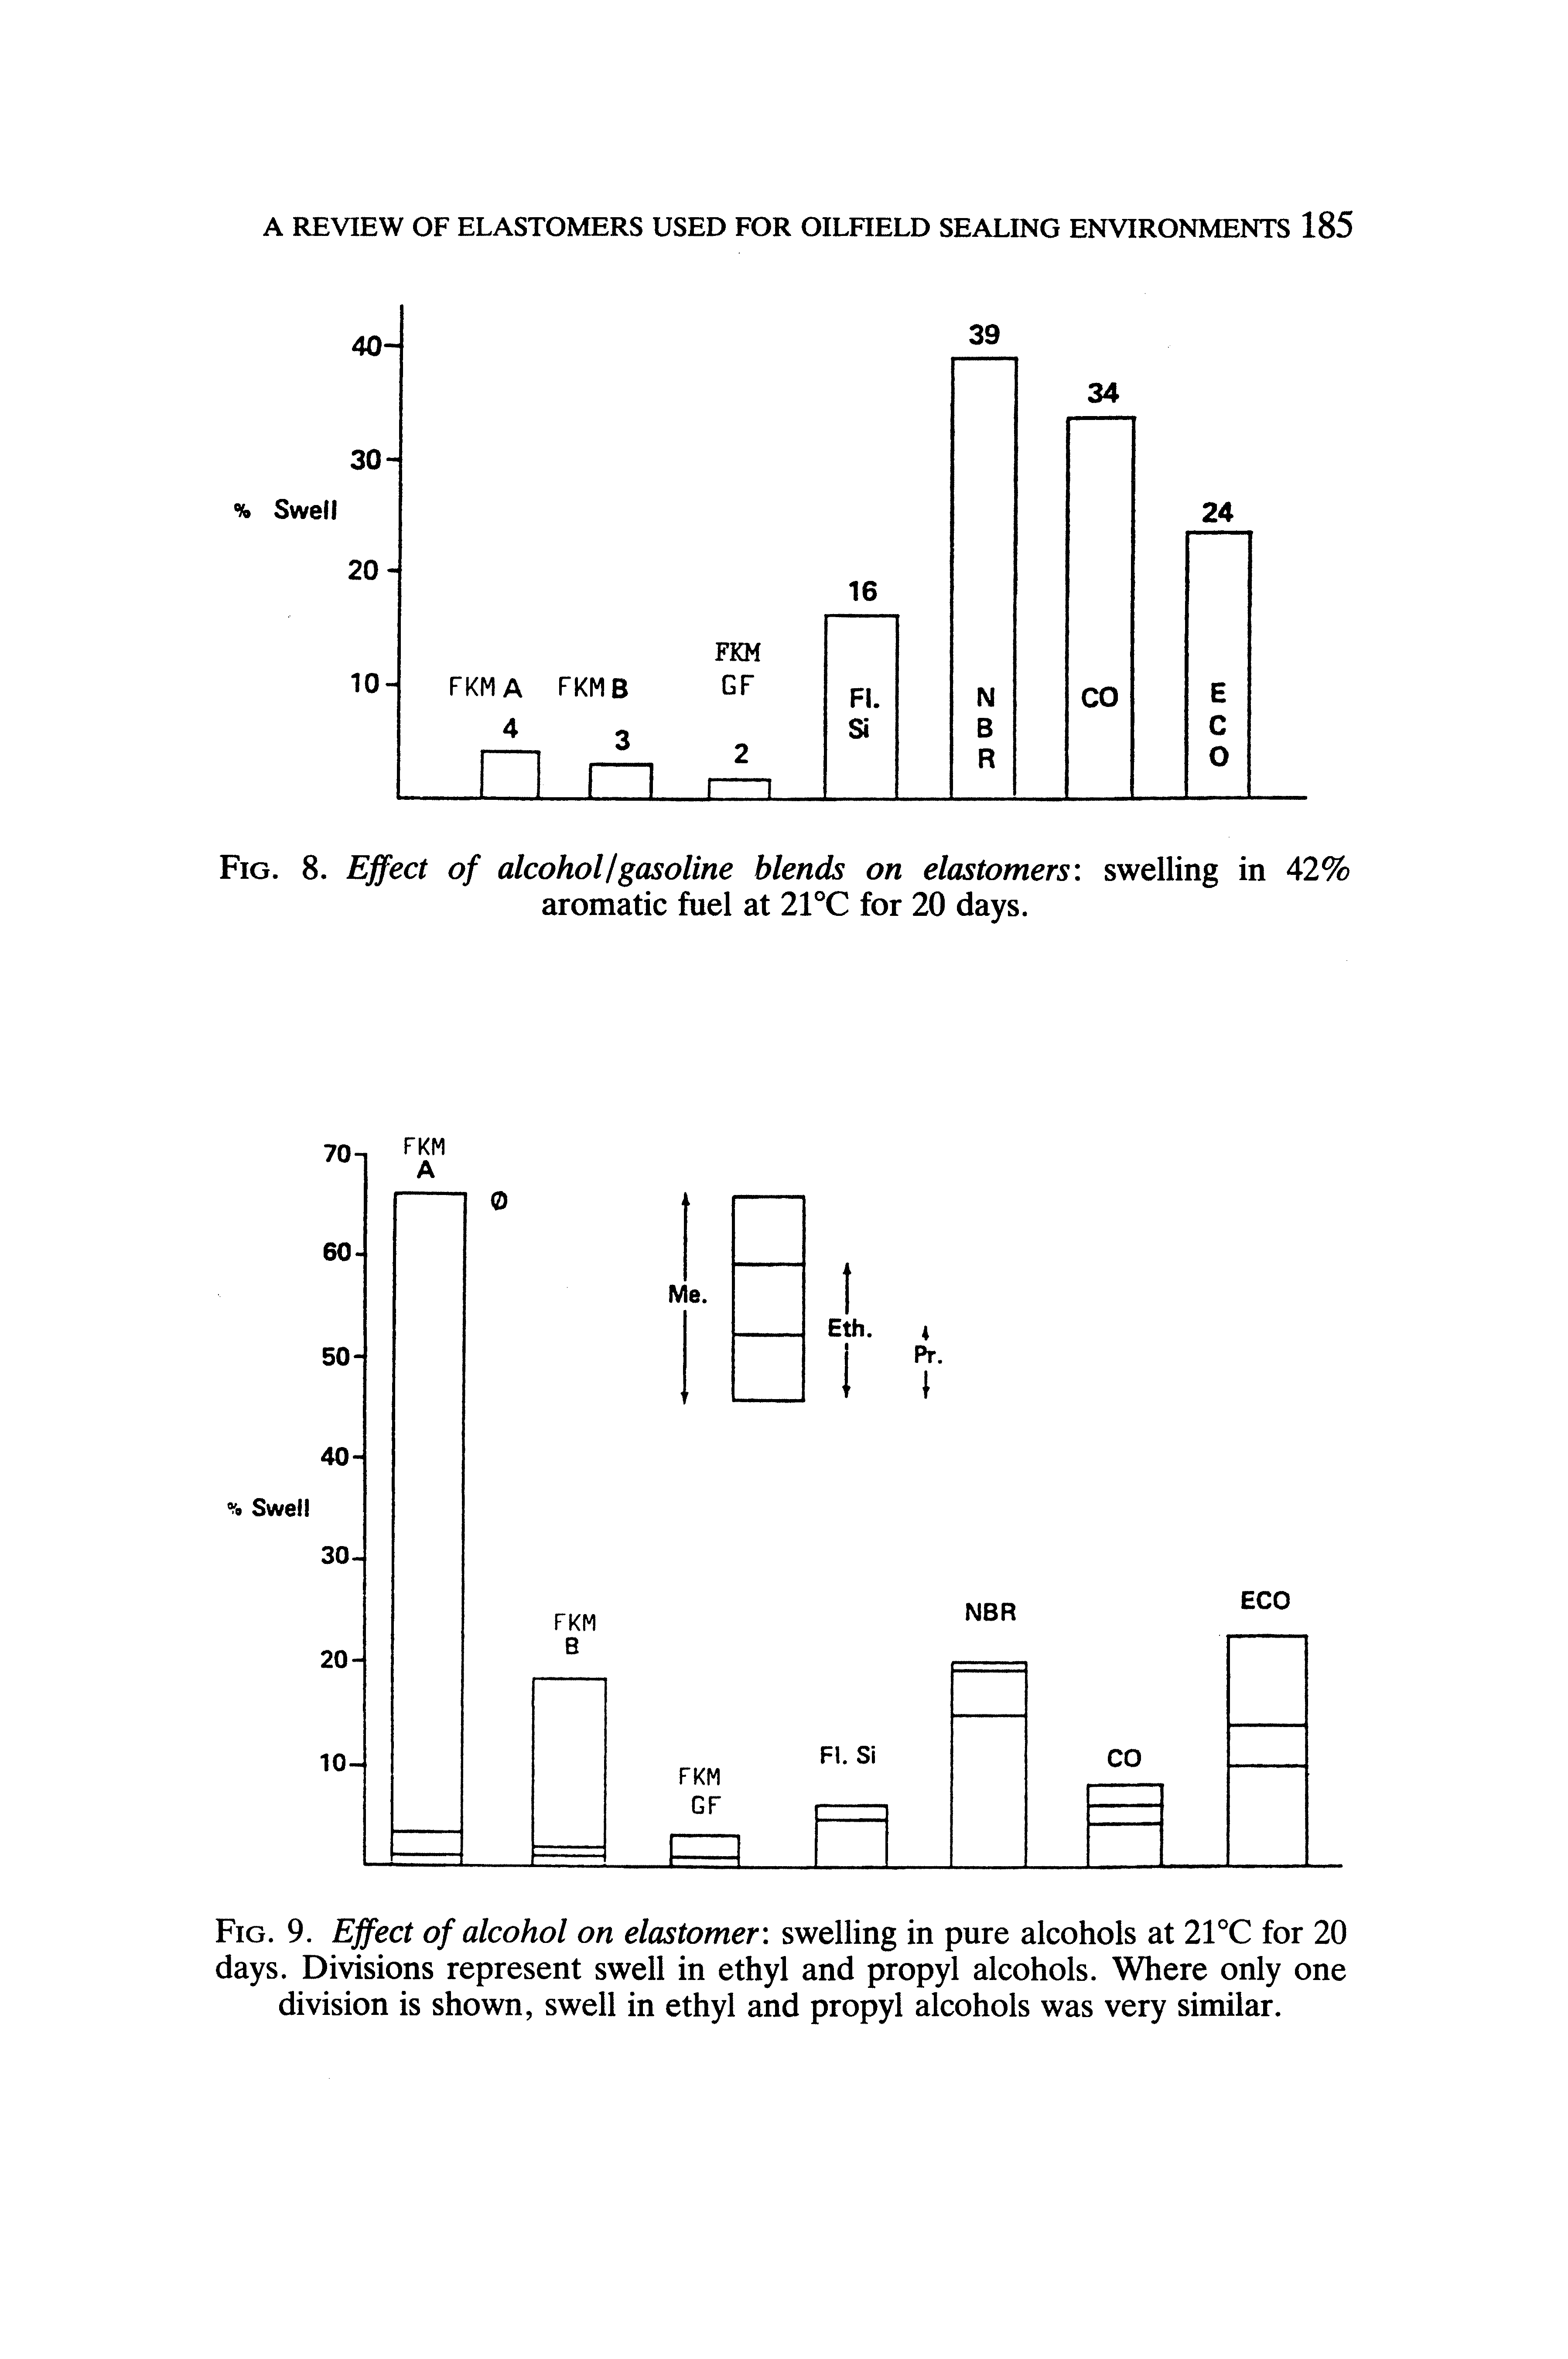 Fig. 9. Effect of alcohol on elastomer swelling in pure alcohols at 21°C for 20 days. Divisions represent swell in ethyl and propyl alcohols. Where only one division is shown, swell in ethyl and propyl alcohols was very similar.